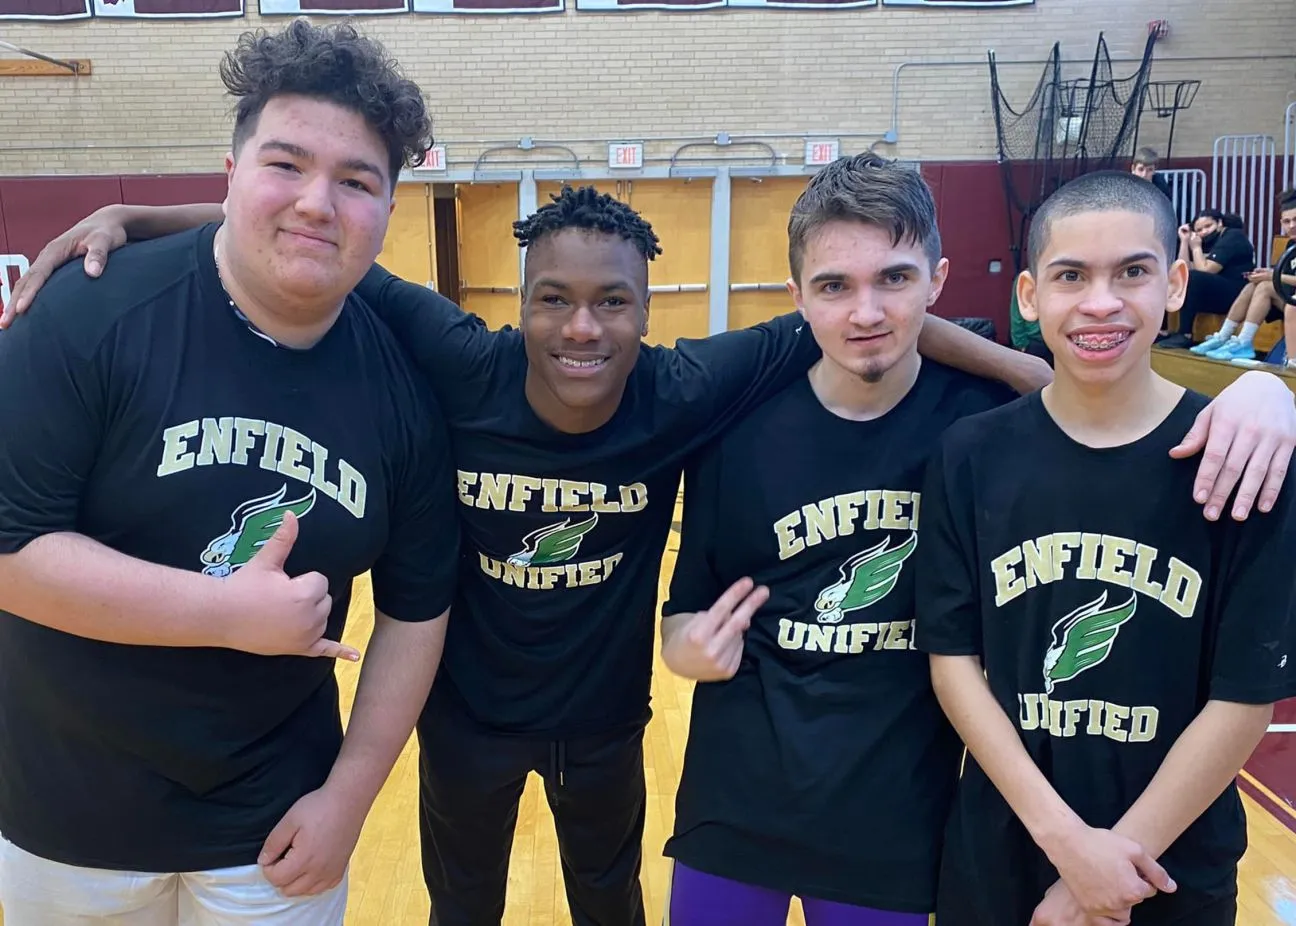 Group of four young adults wearing Enfield Unified shirts posing together.